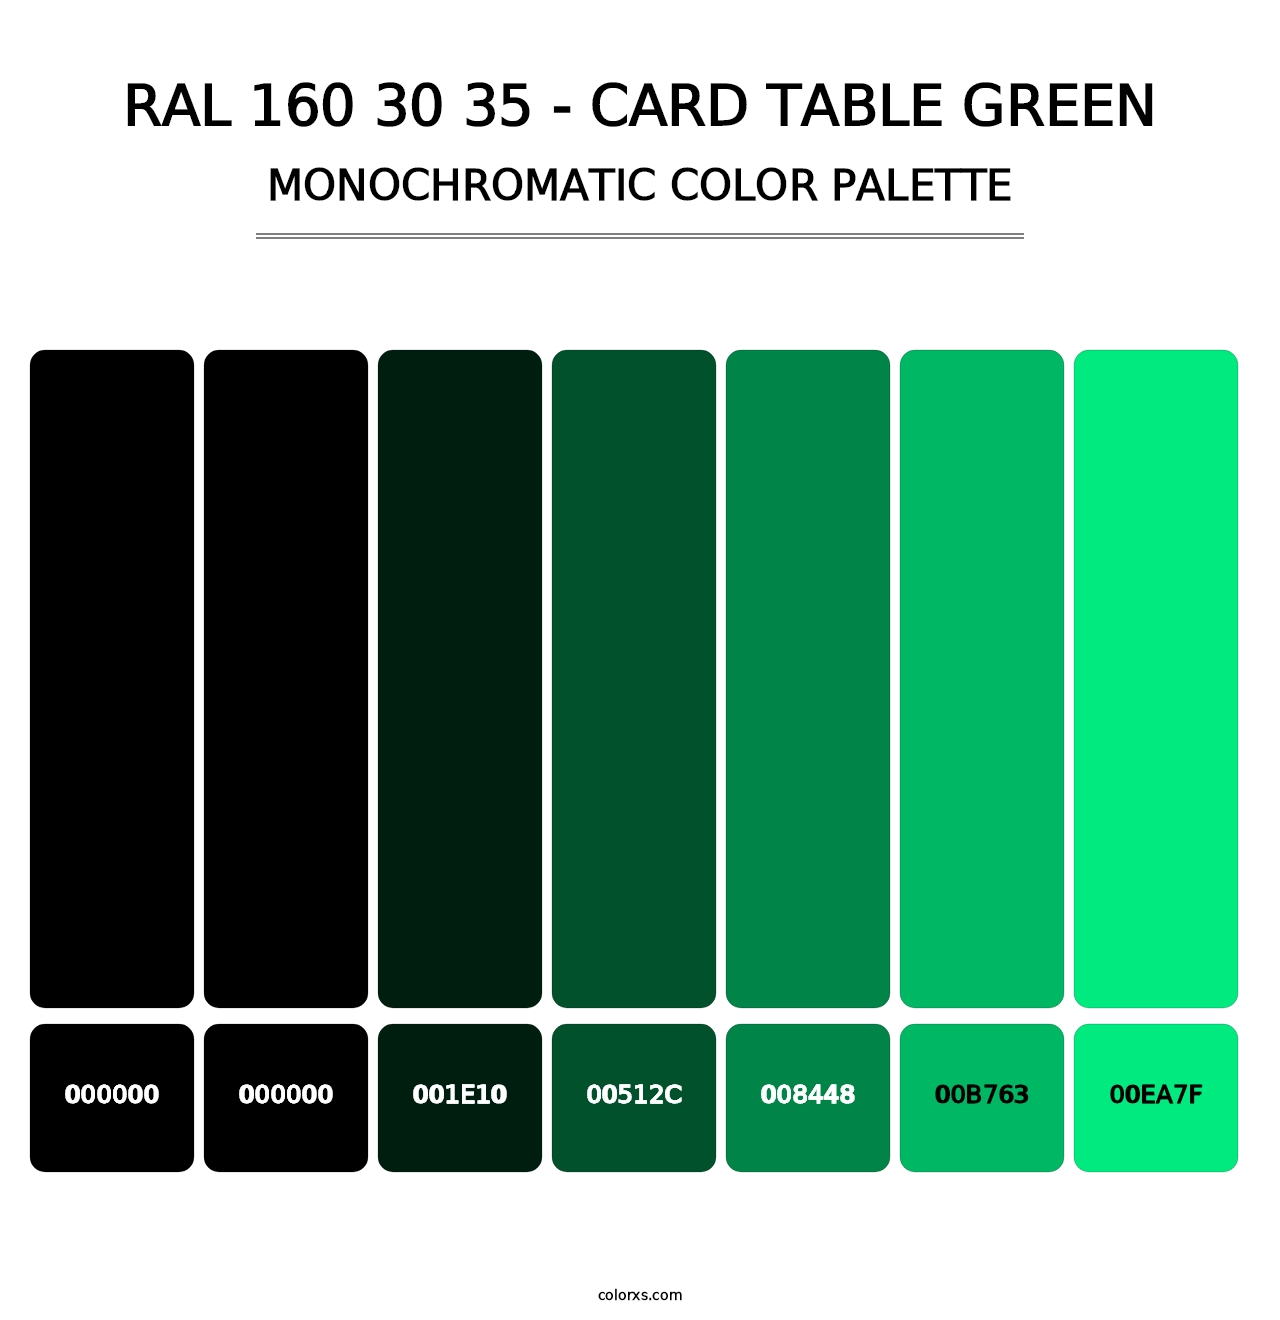 RAL 160 30 35 - Card Table Green - Monochromatic Color Palette